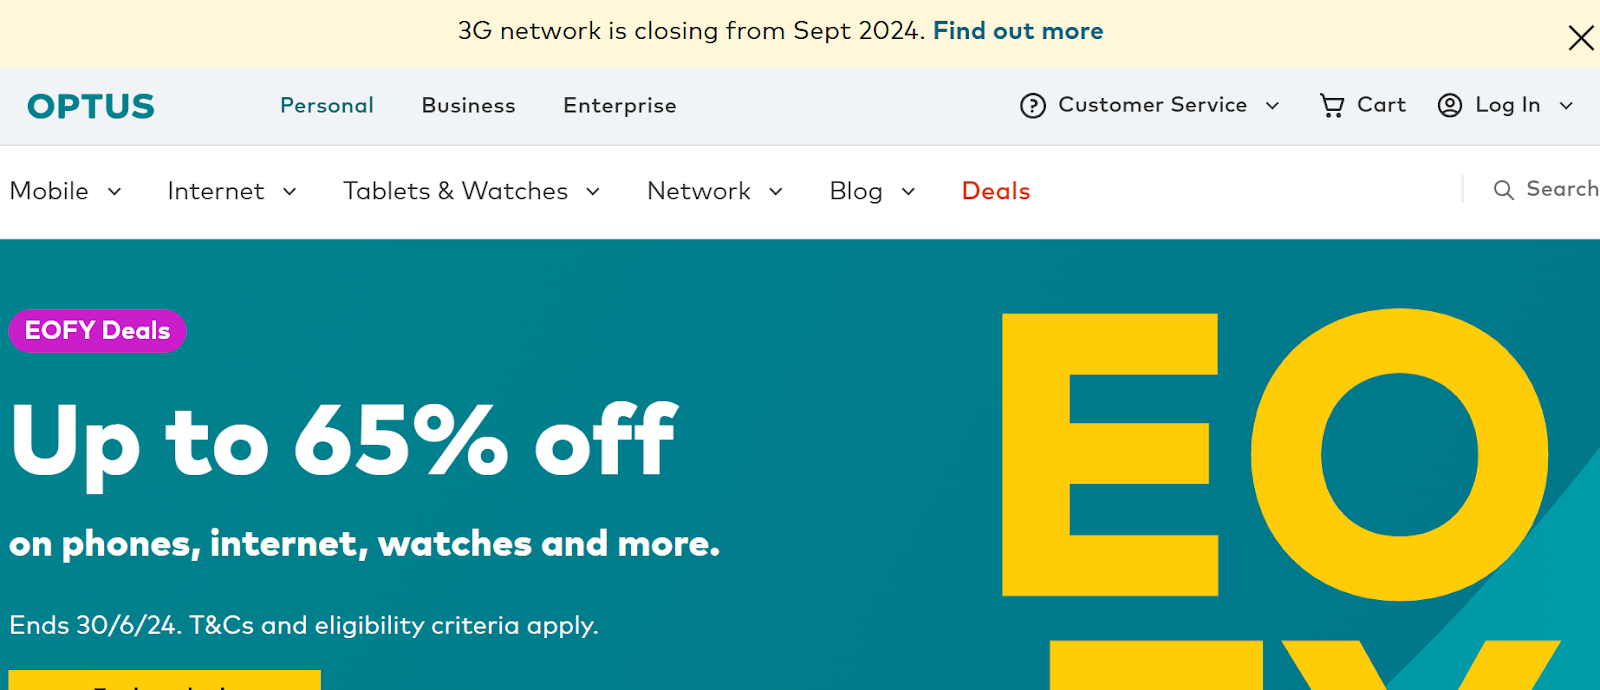 Optus website snapshot highlighting the services it offers.